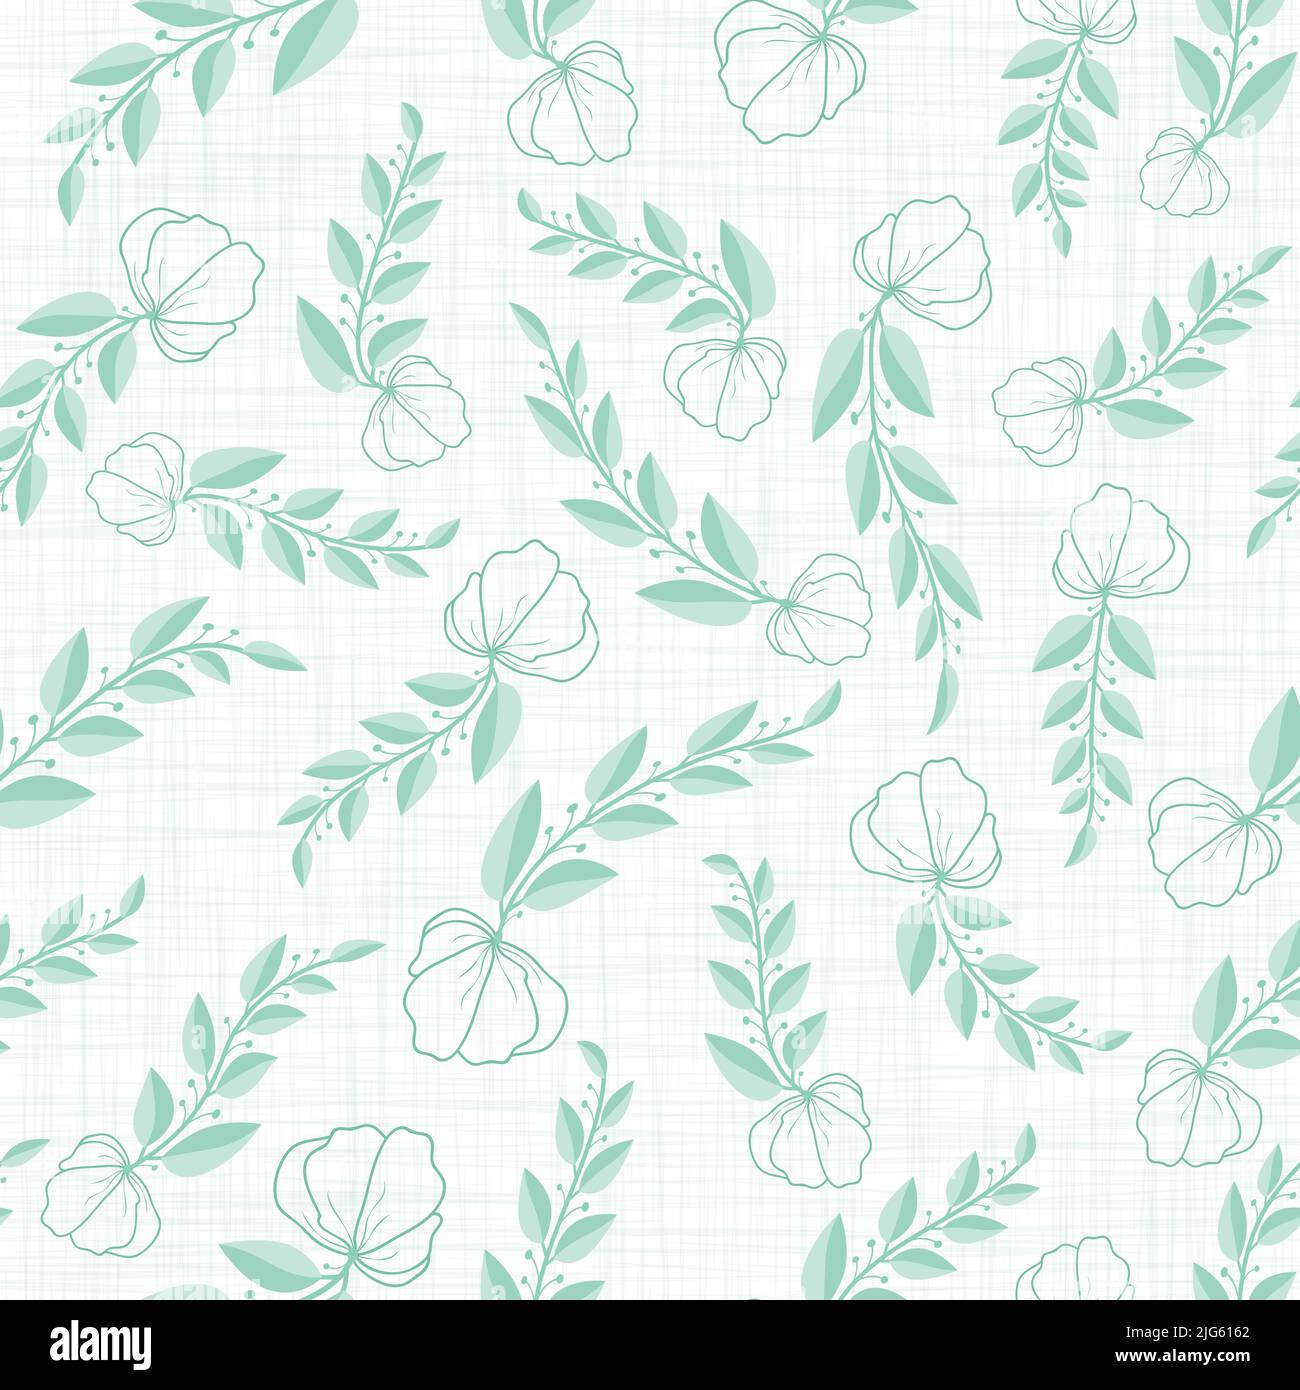 Sea green vector floral branches textured background seamless repeat pattern Stock Vector